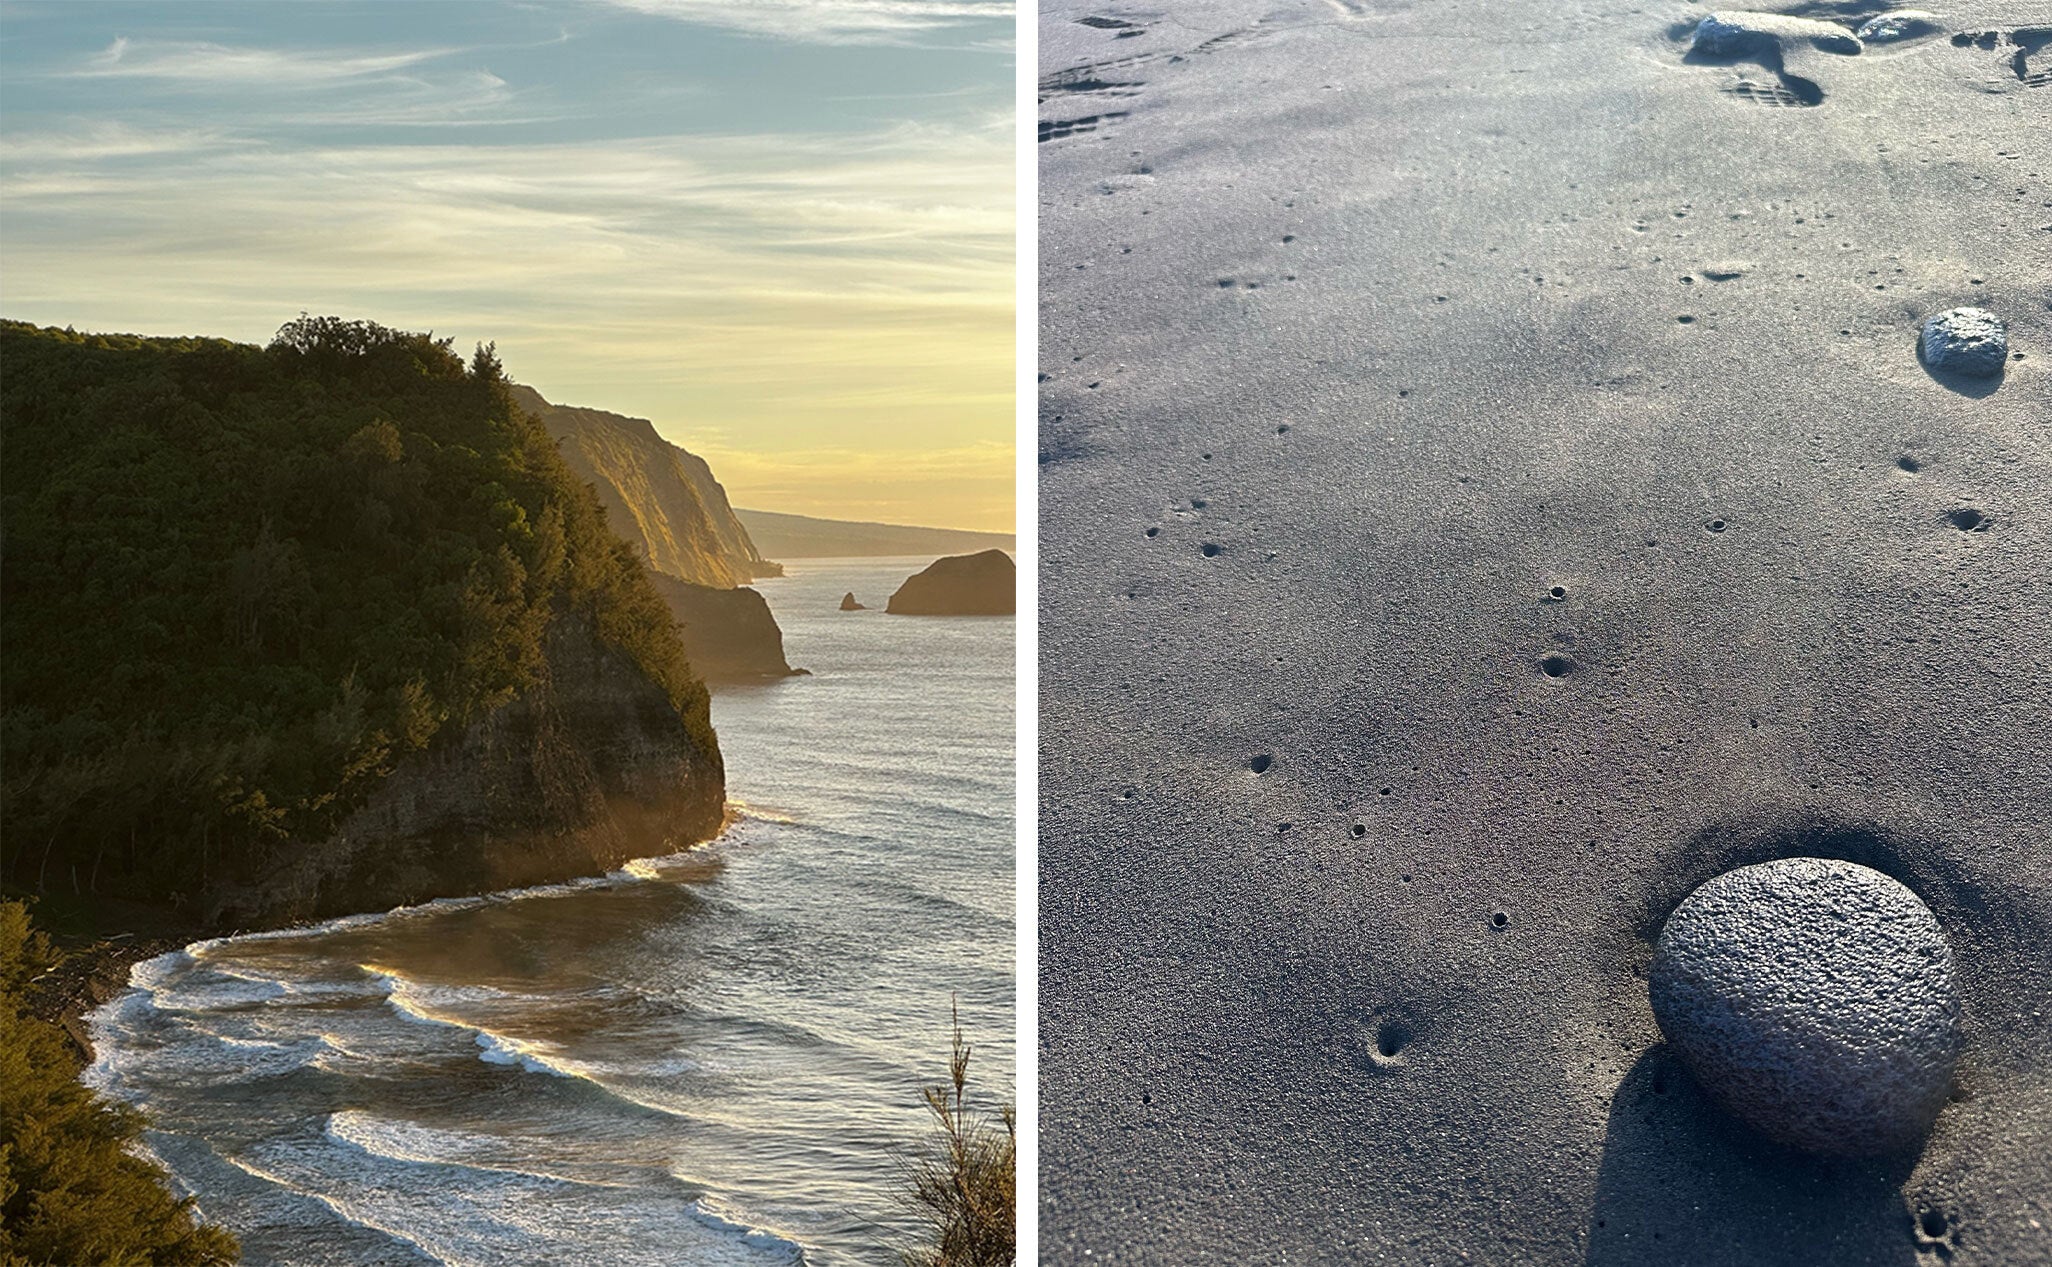 A photo of a cliffside and an image of a sandy beach side by side